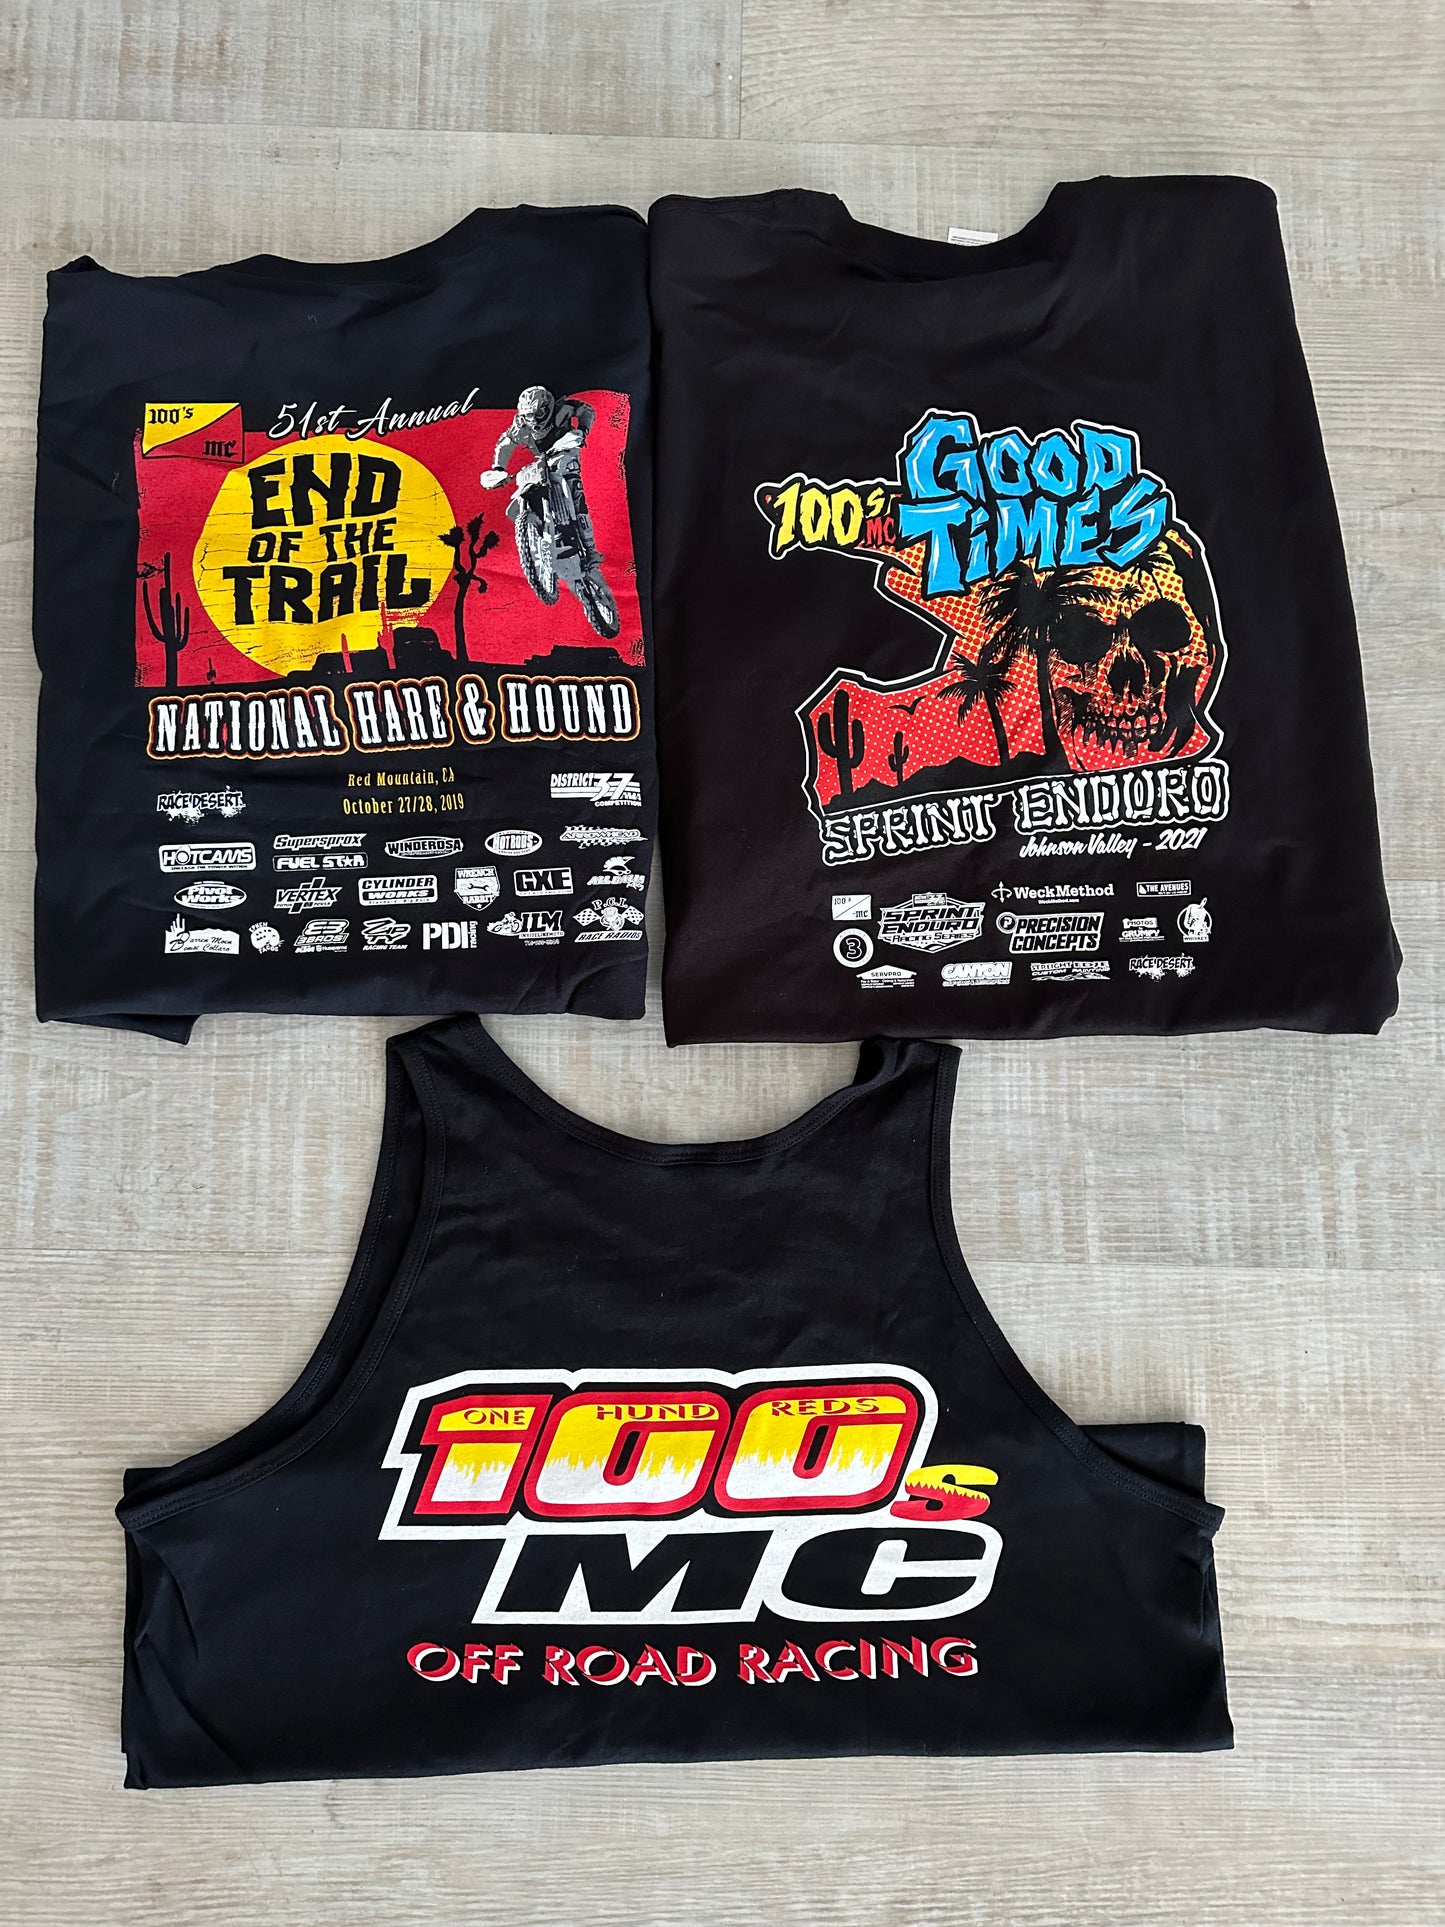 Adult XL - 3 Pack - 100's Club Apparel & Event Shirts